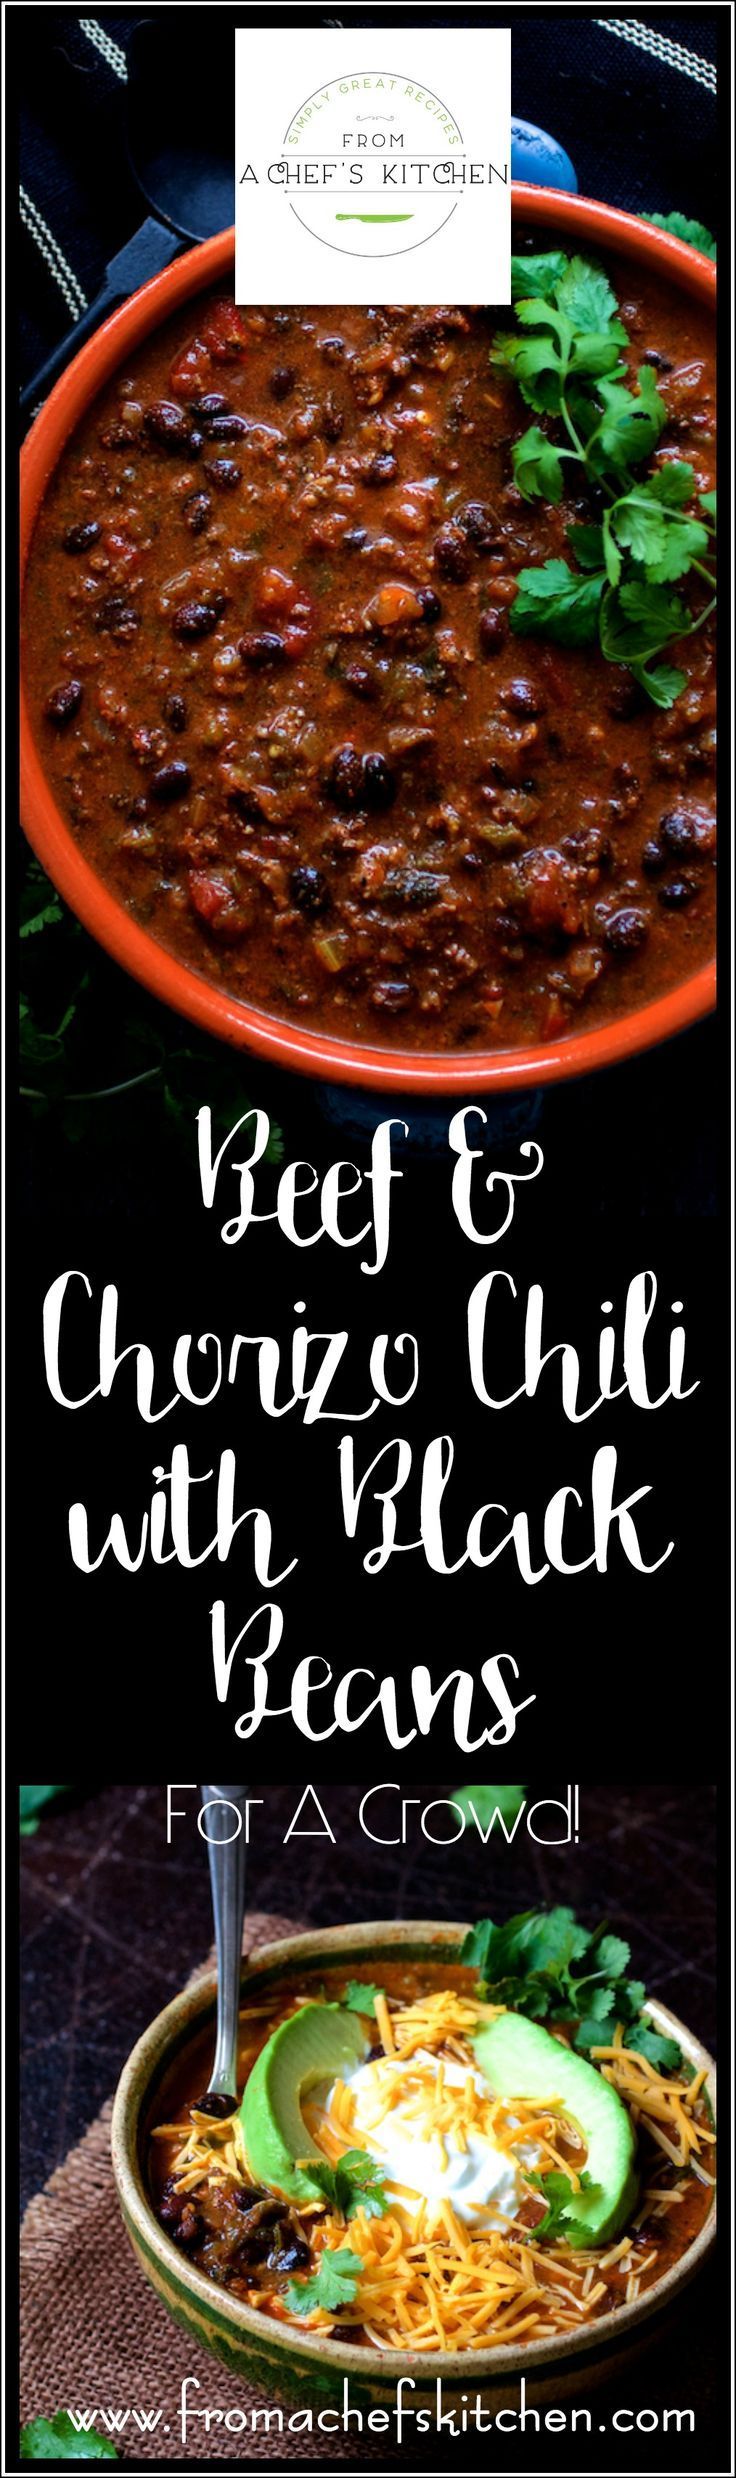 Beef and Chorizo Chili with Black Beans is scaled for a crowd and perfect for a party! Beef, chorizo, red wine and Poblano peppers